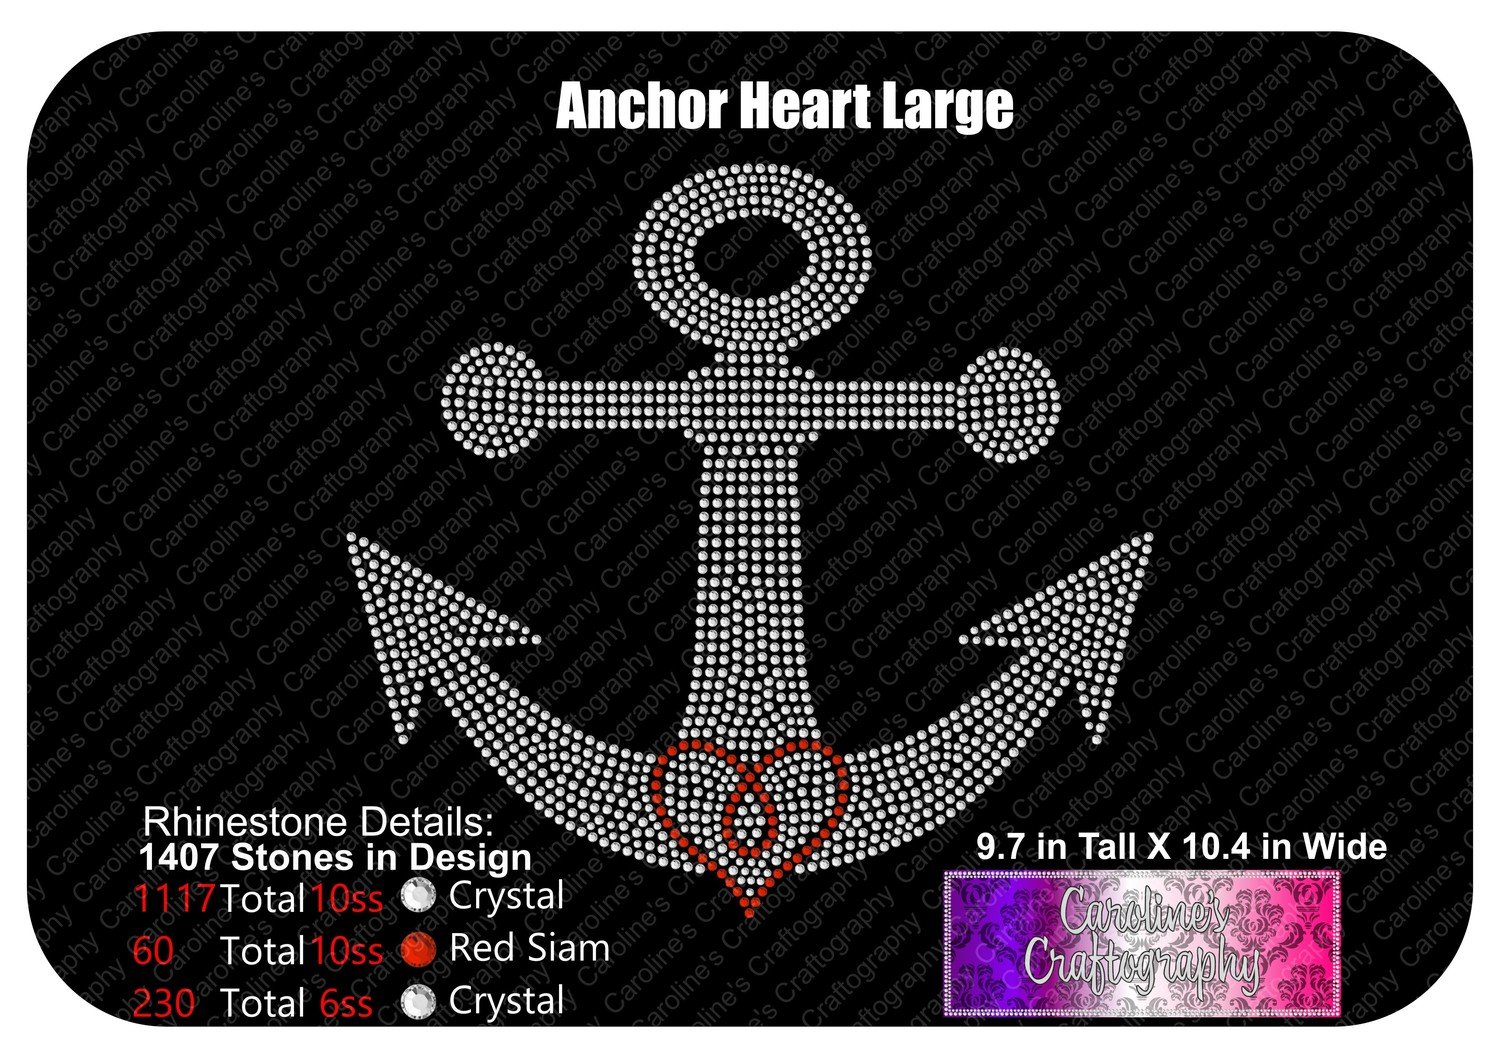 Anchor Heart Stone Large